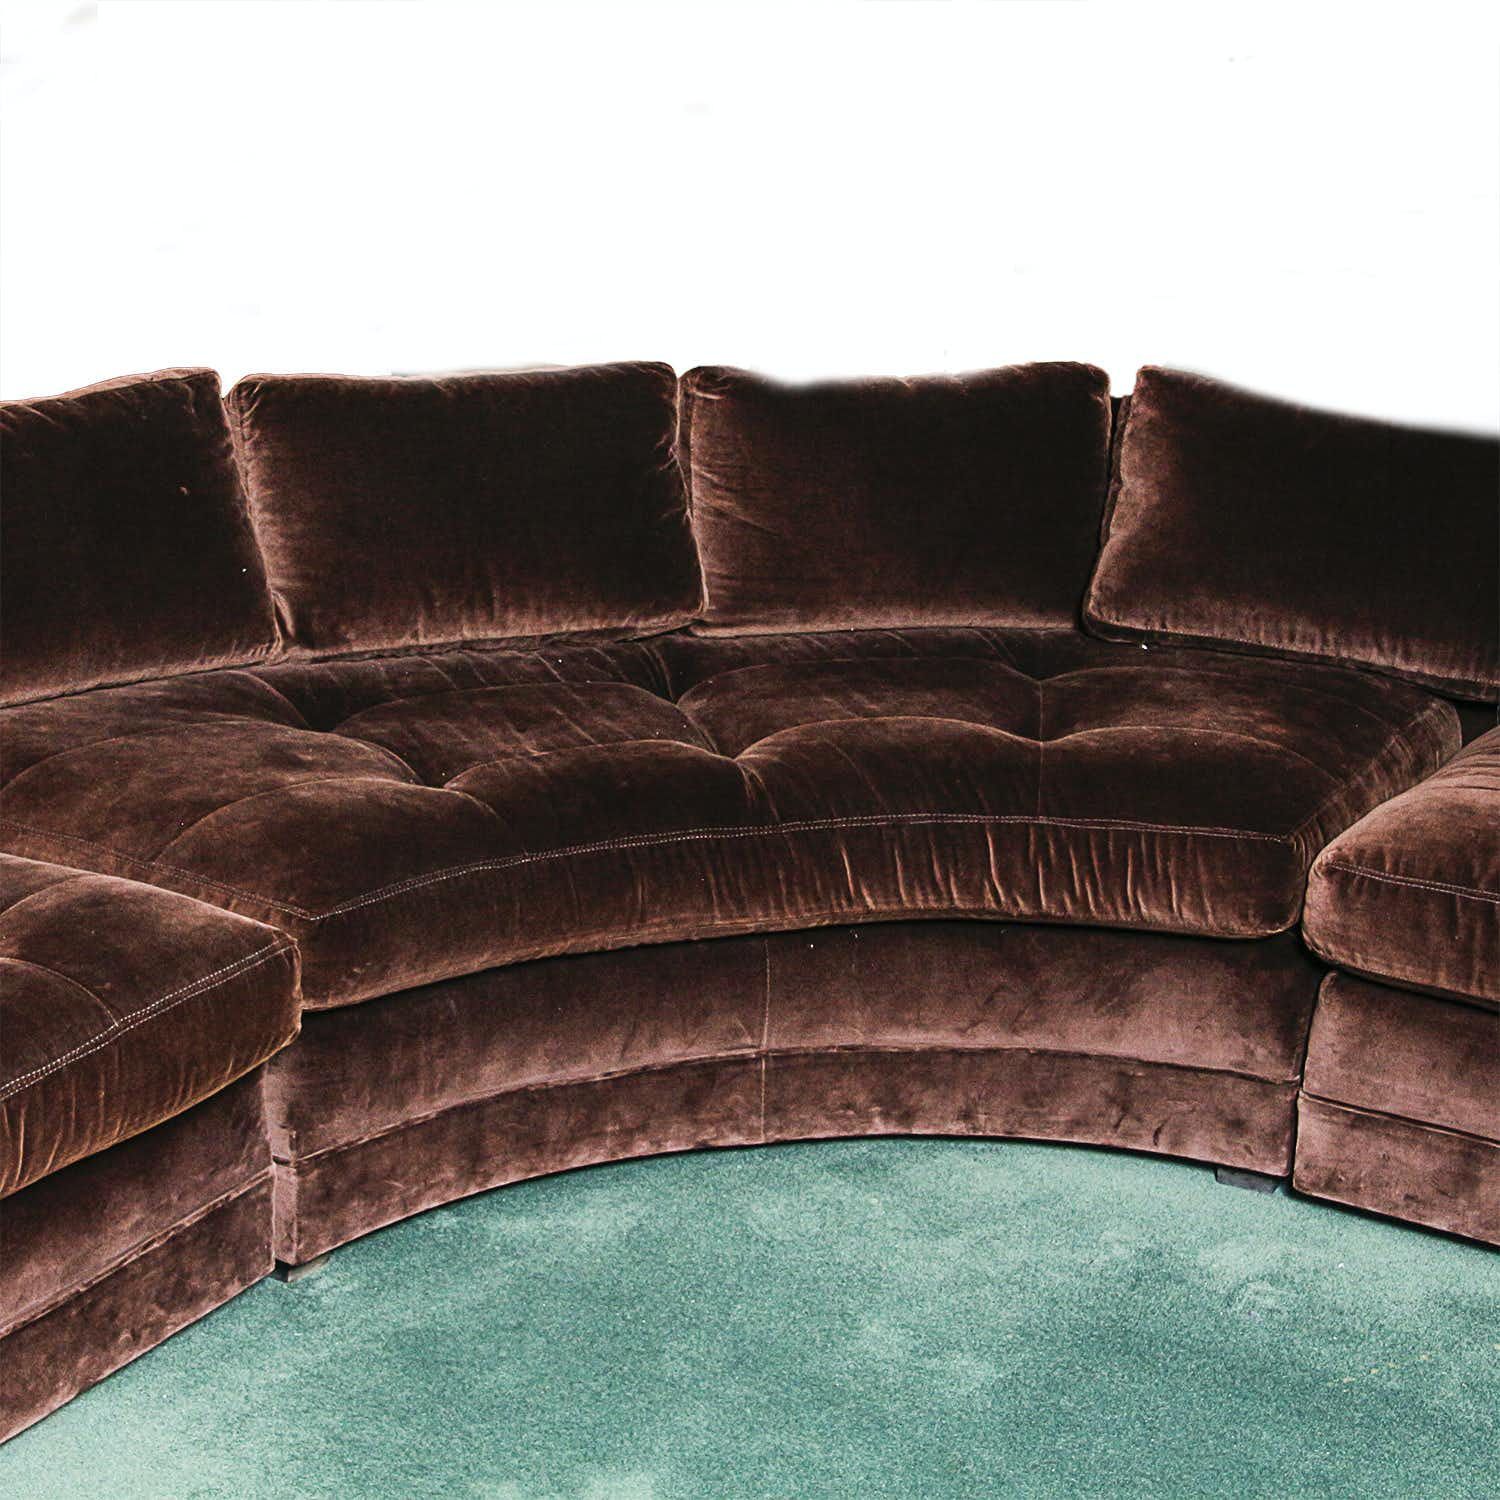 Chocolate Brown Velvet Upholstered Sectional Sofa : Ebth Inside Sofas In Chocolate Brown (View 11 of 20)